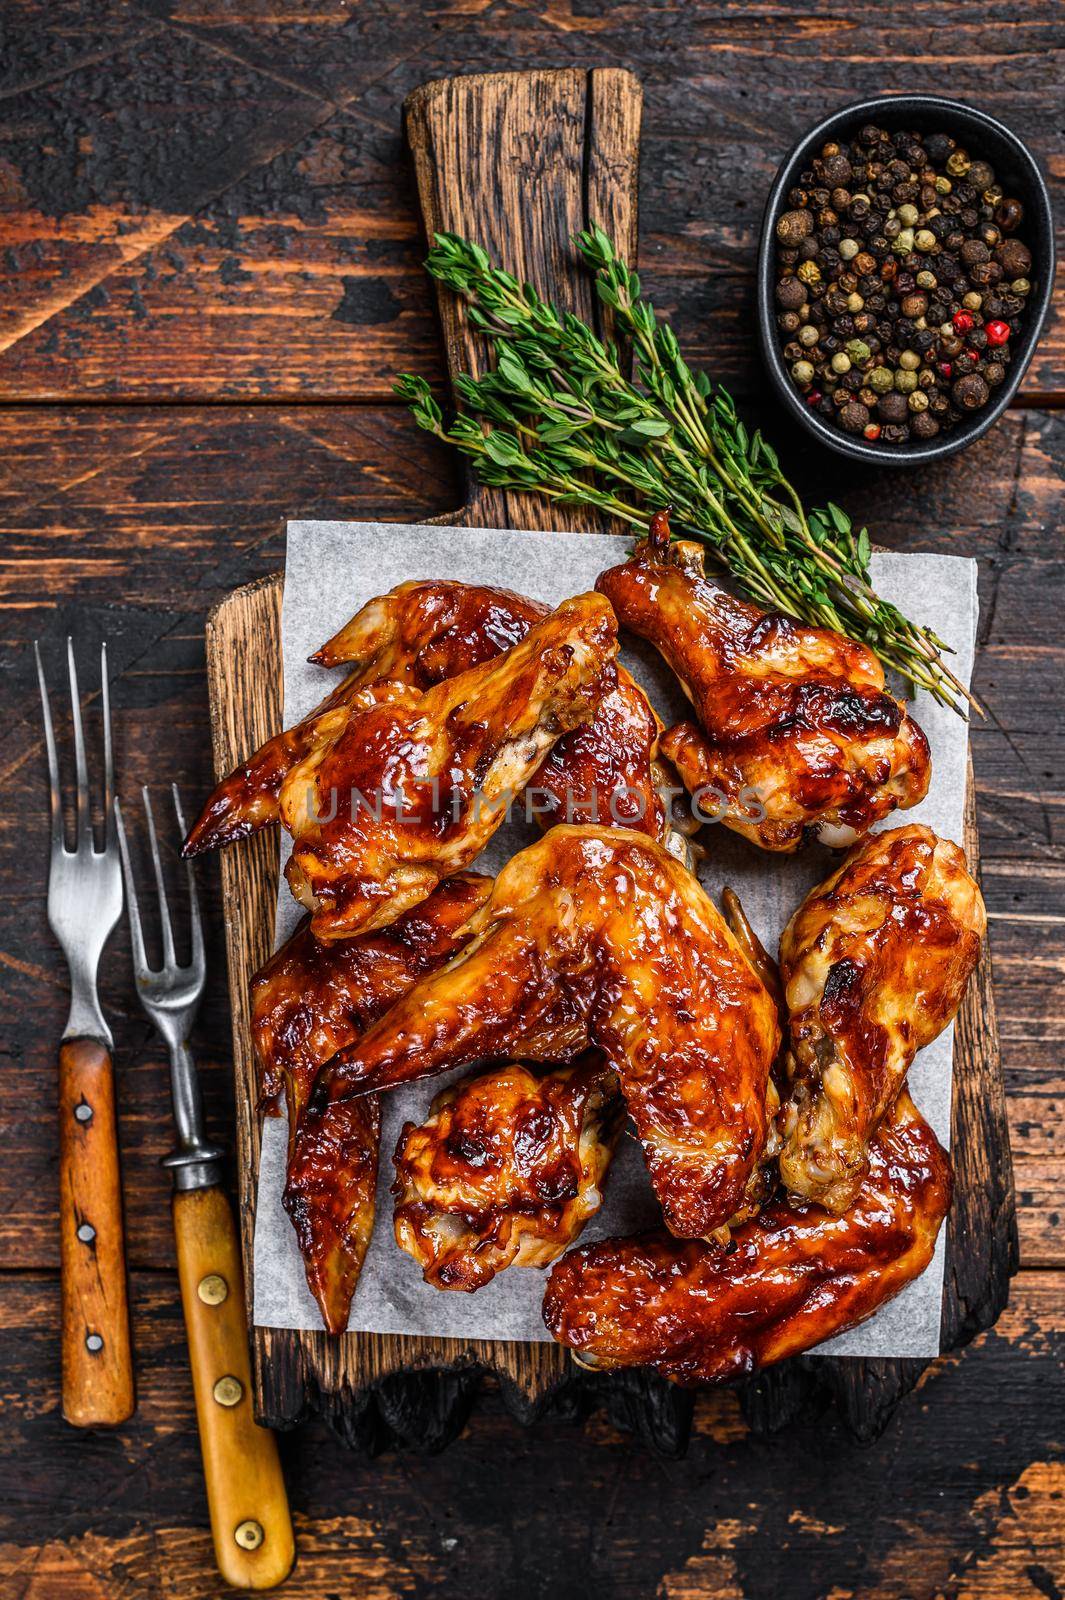 Baked Bbq chicken wings with dip sauce. Dark wooden background. Top view by Composter